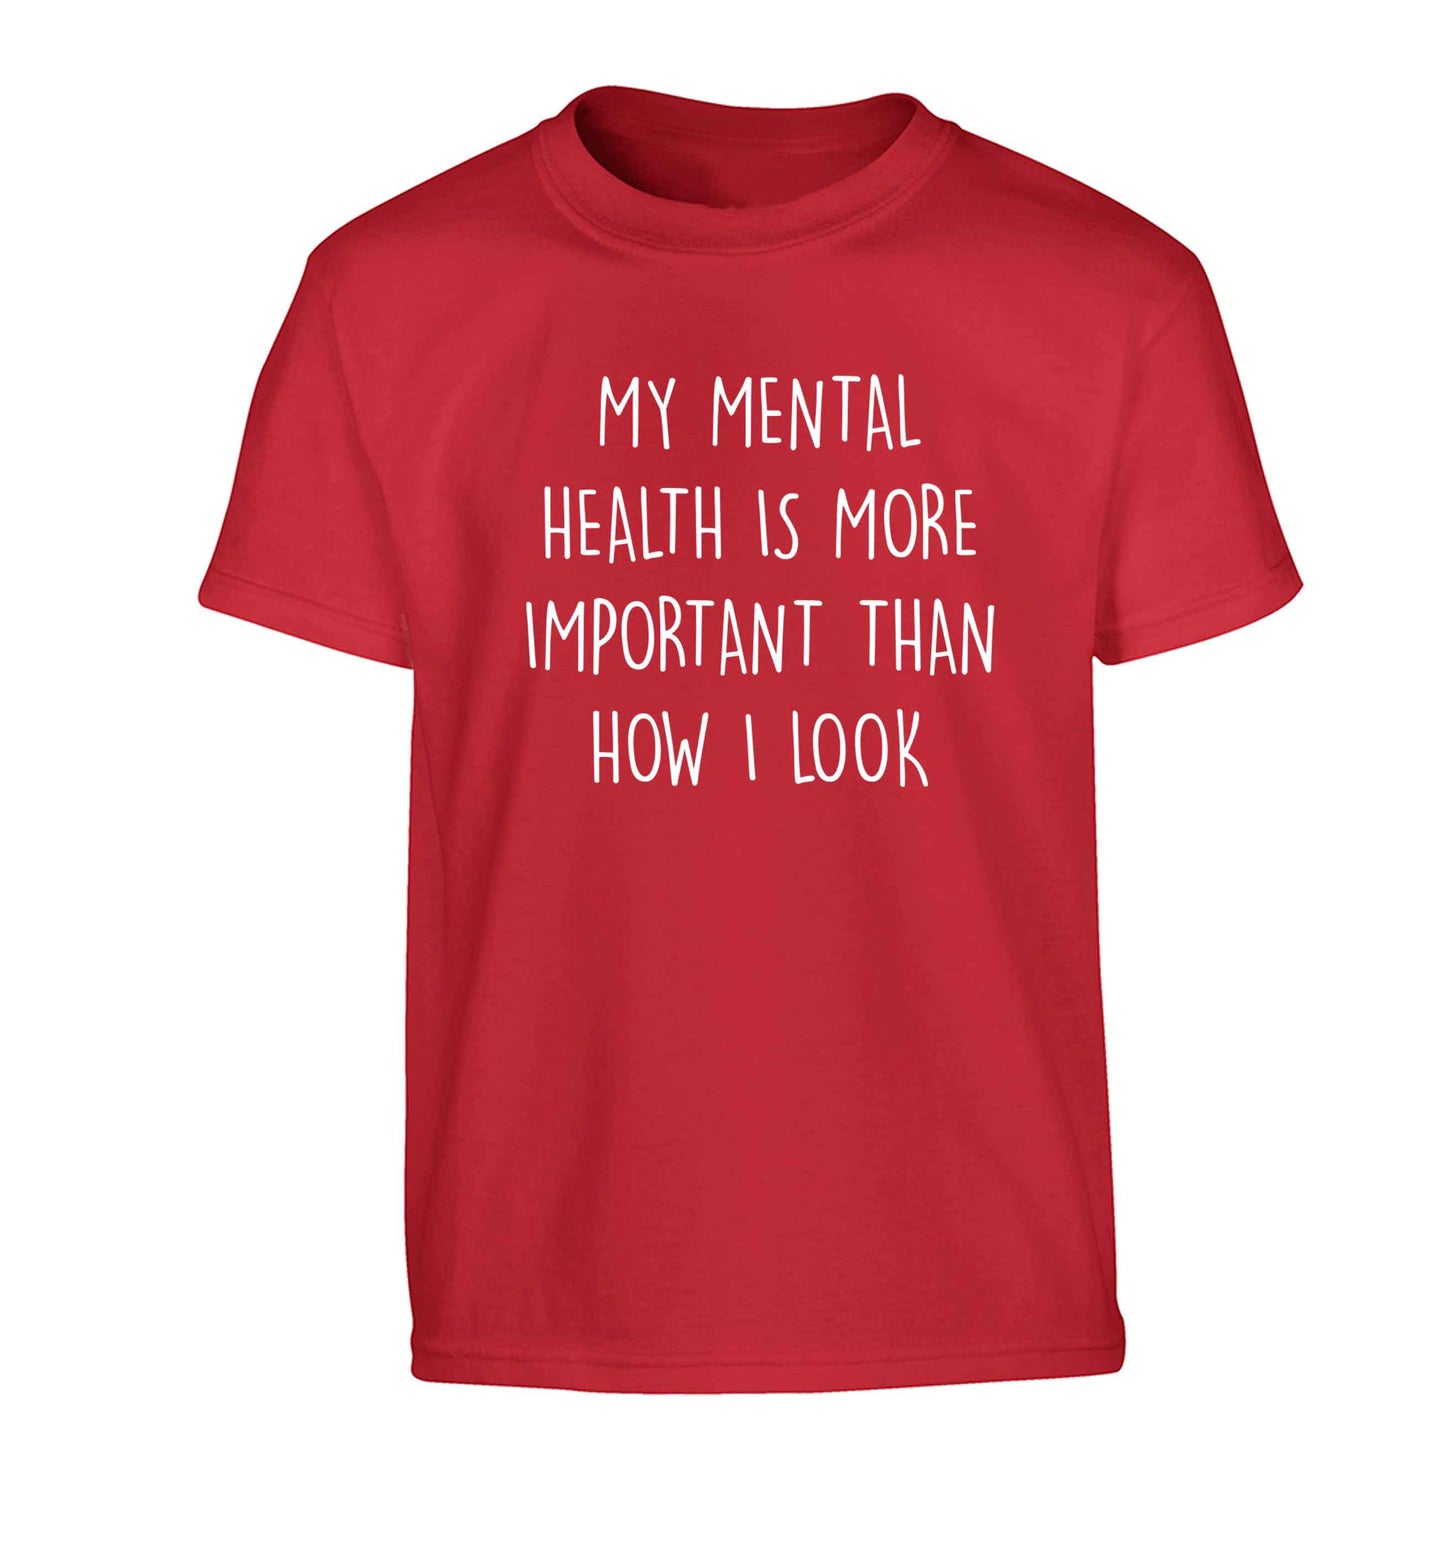 My mental health is more importnat than how I look Children's red Tshirt 12-13 Years